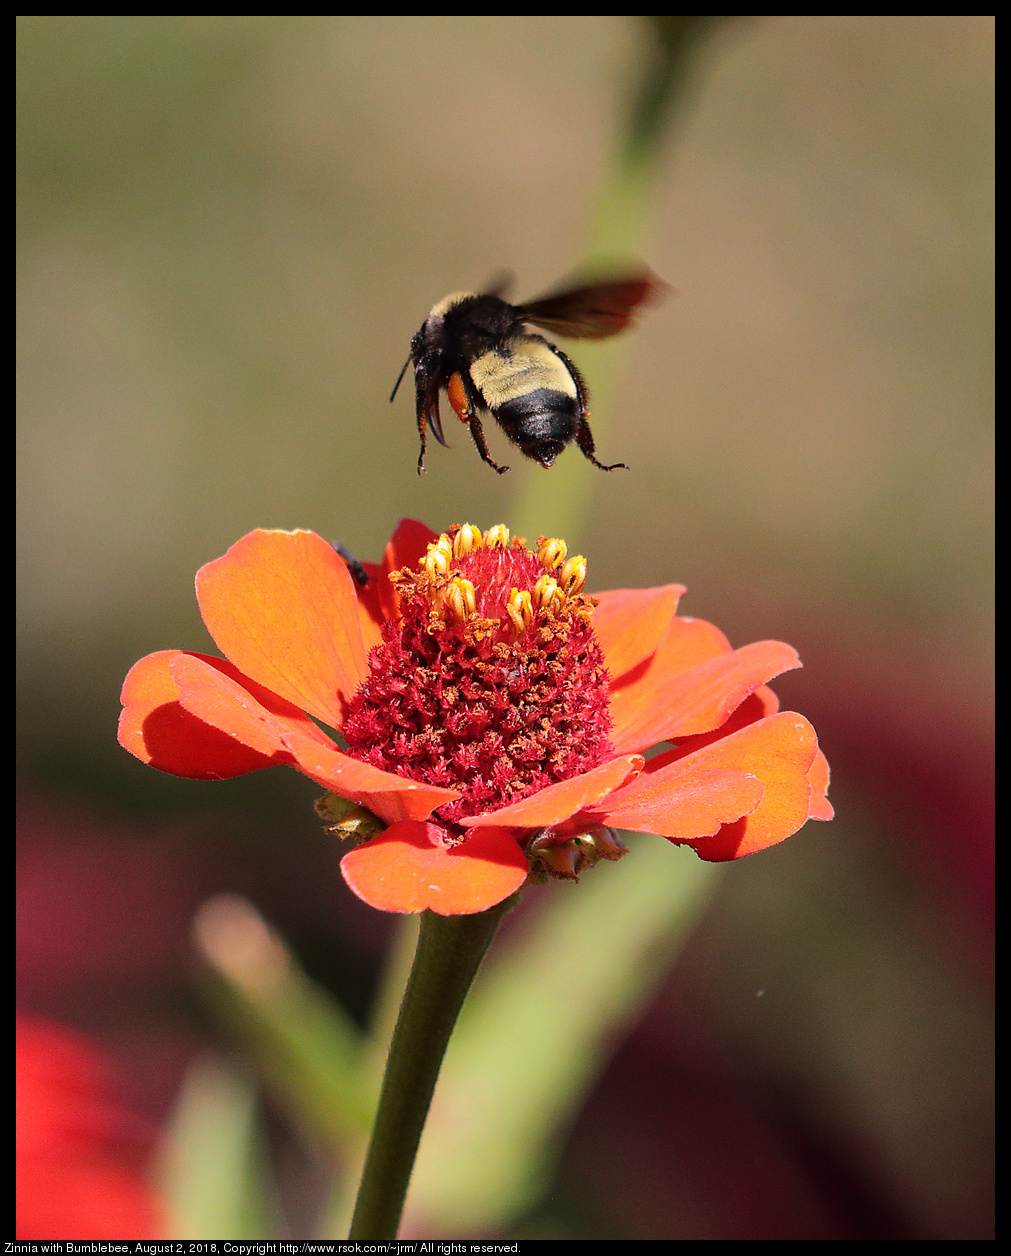 Zinnia with Bumblebee, August 2, 2018